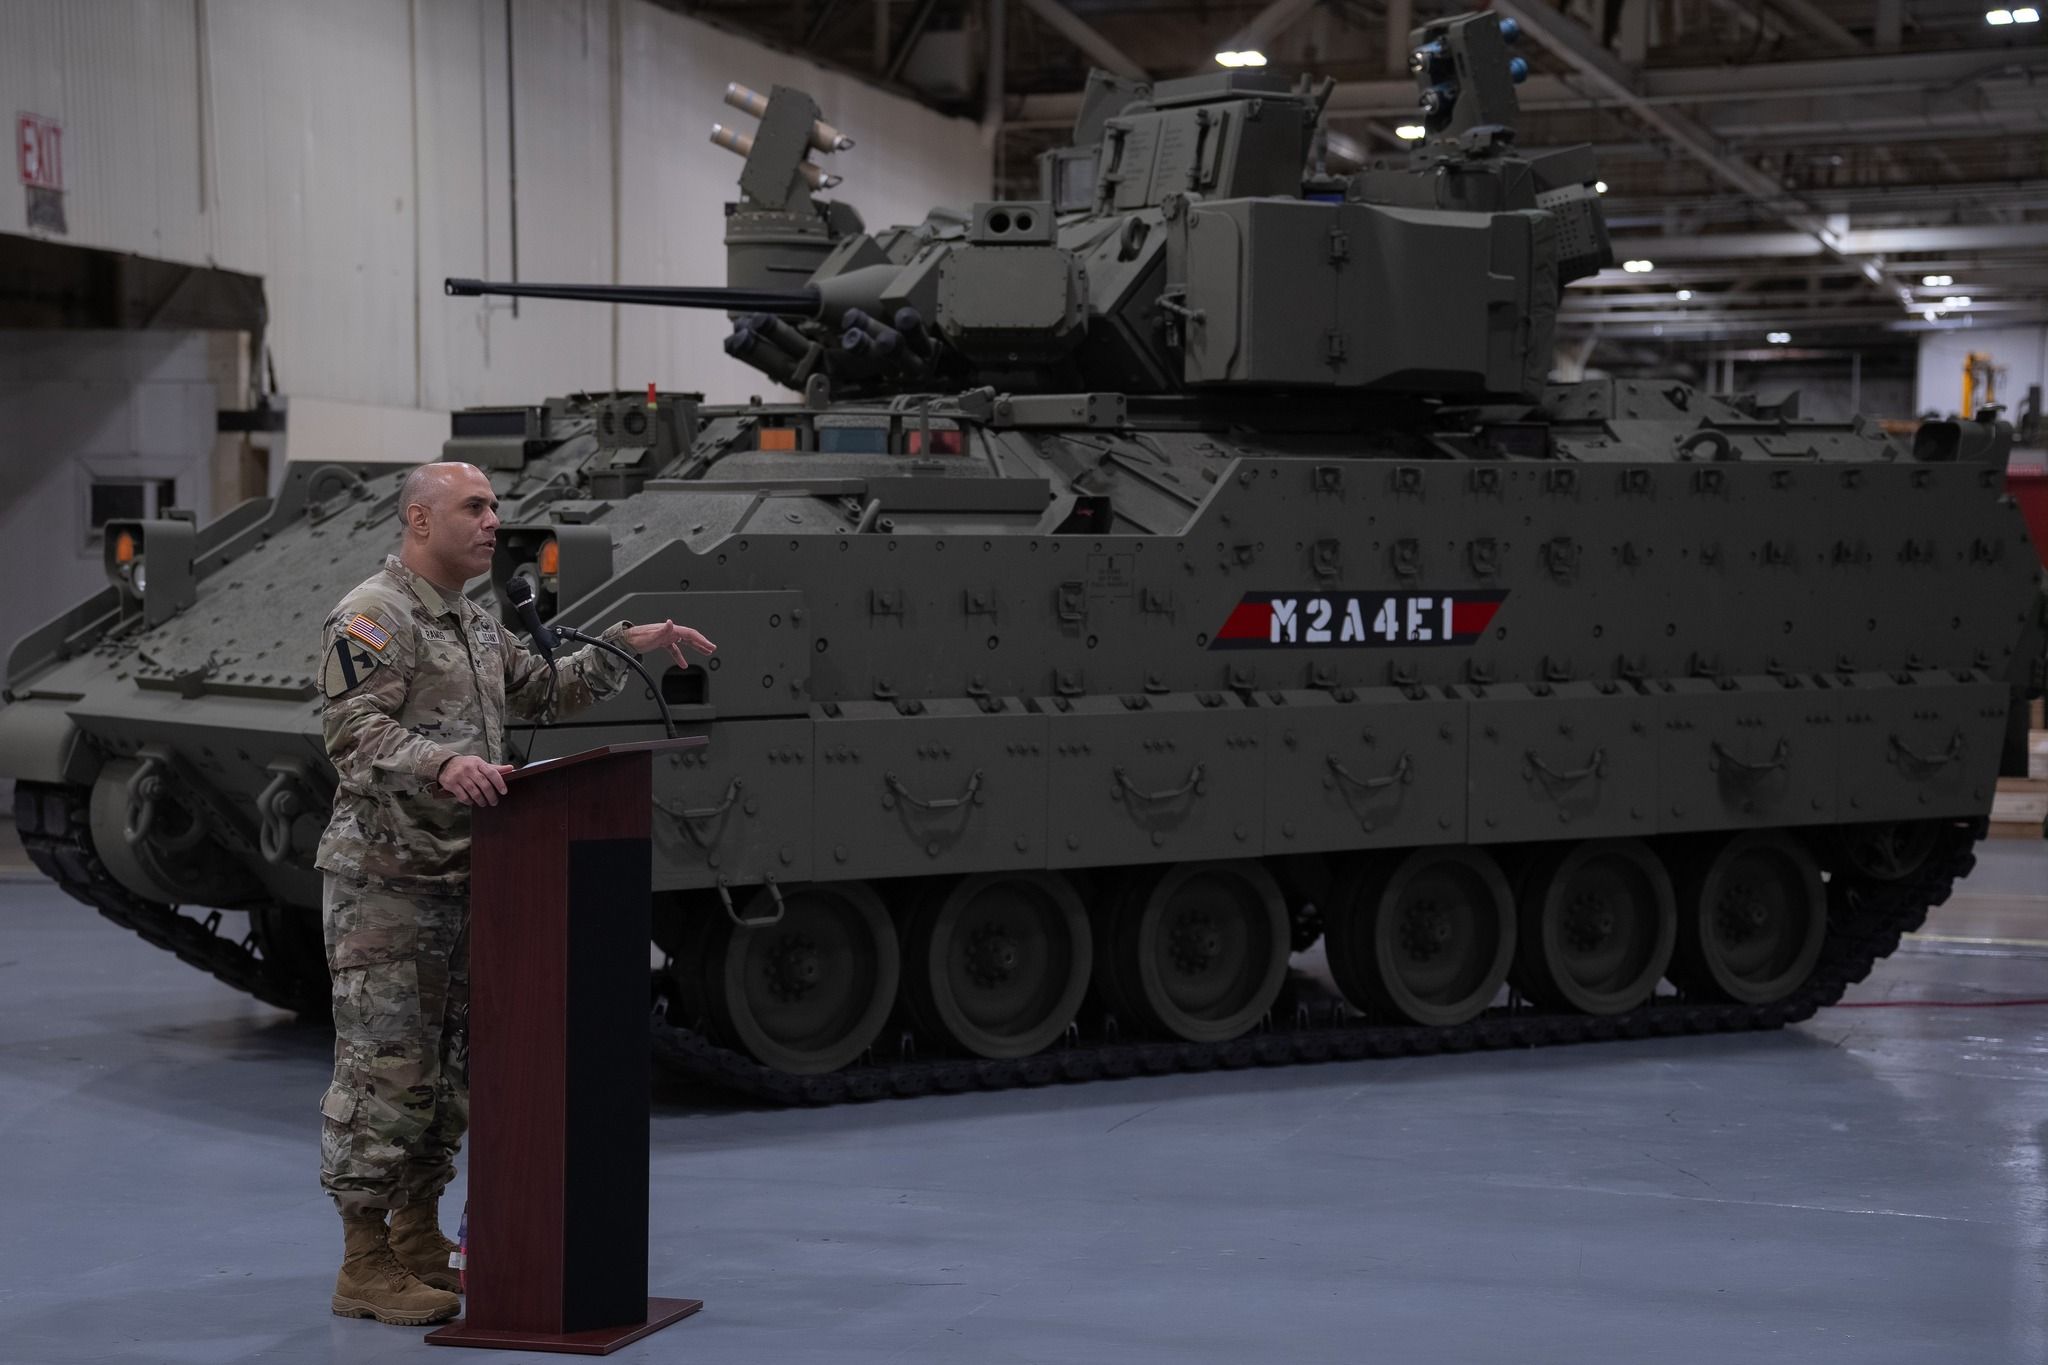 m2a4e1 bradley at unveiling ceremony in april 2024